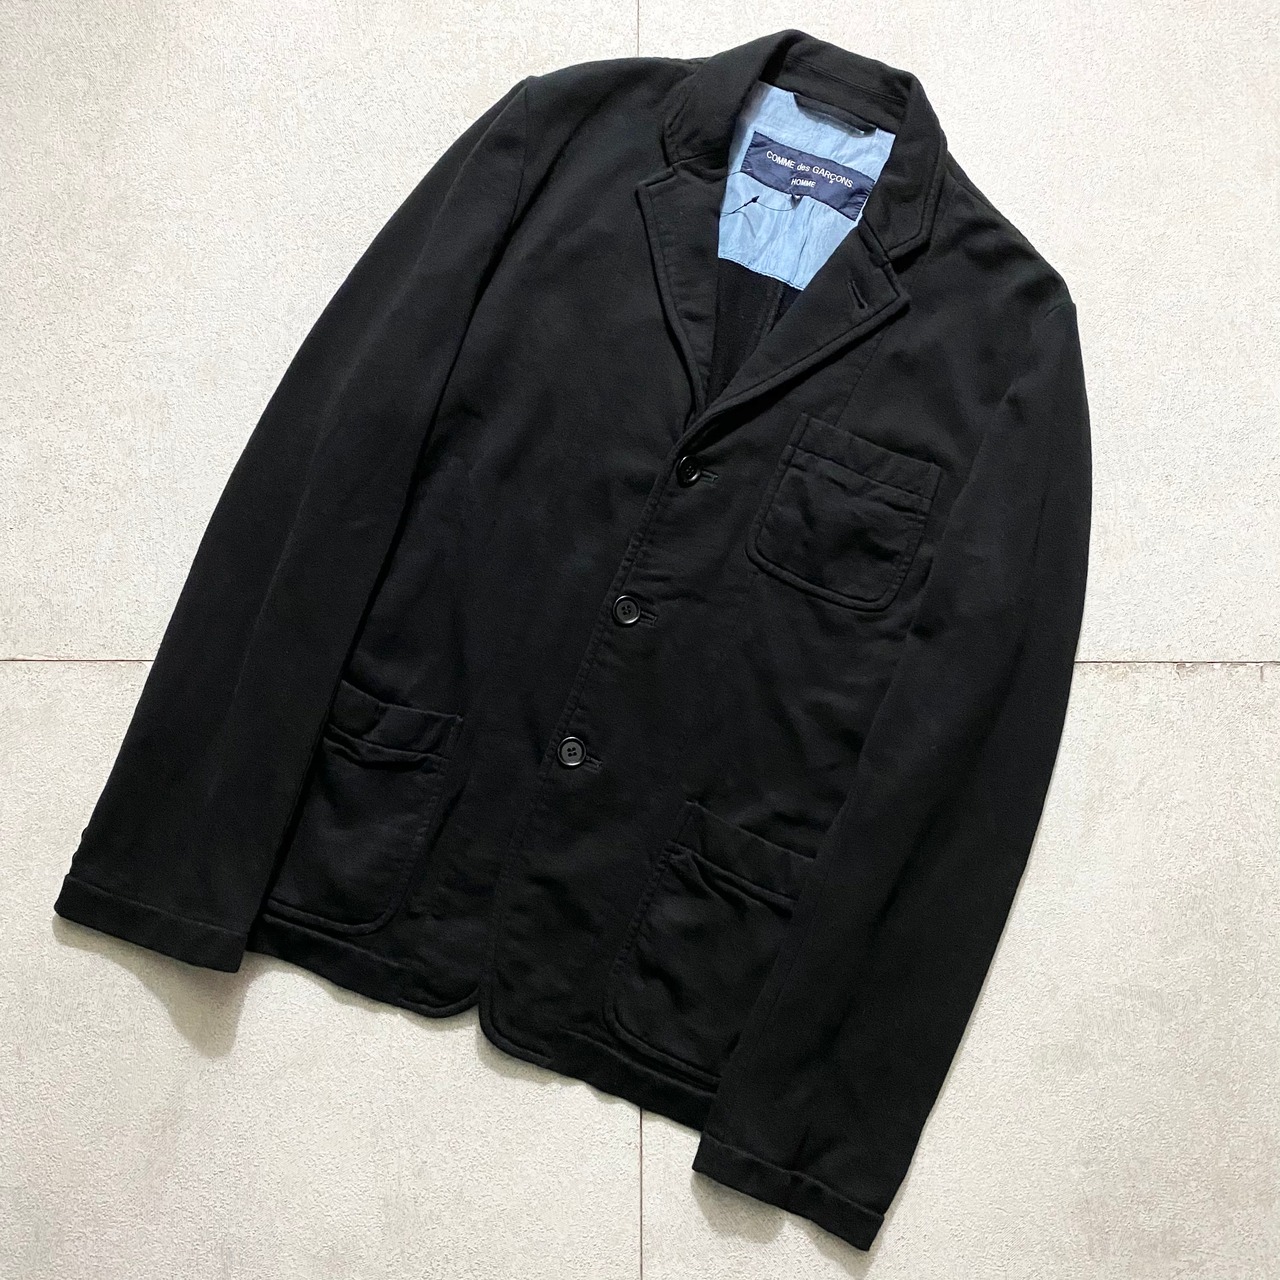 AD2008 COMME des GARCONS HOMME jersey tailored jacket